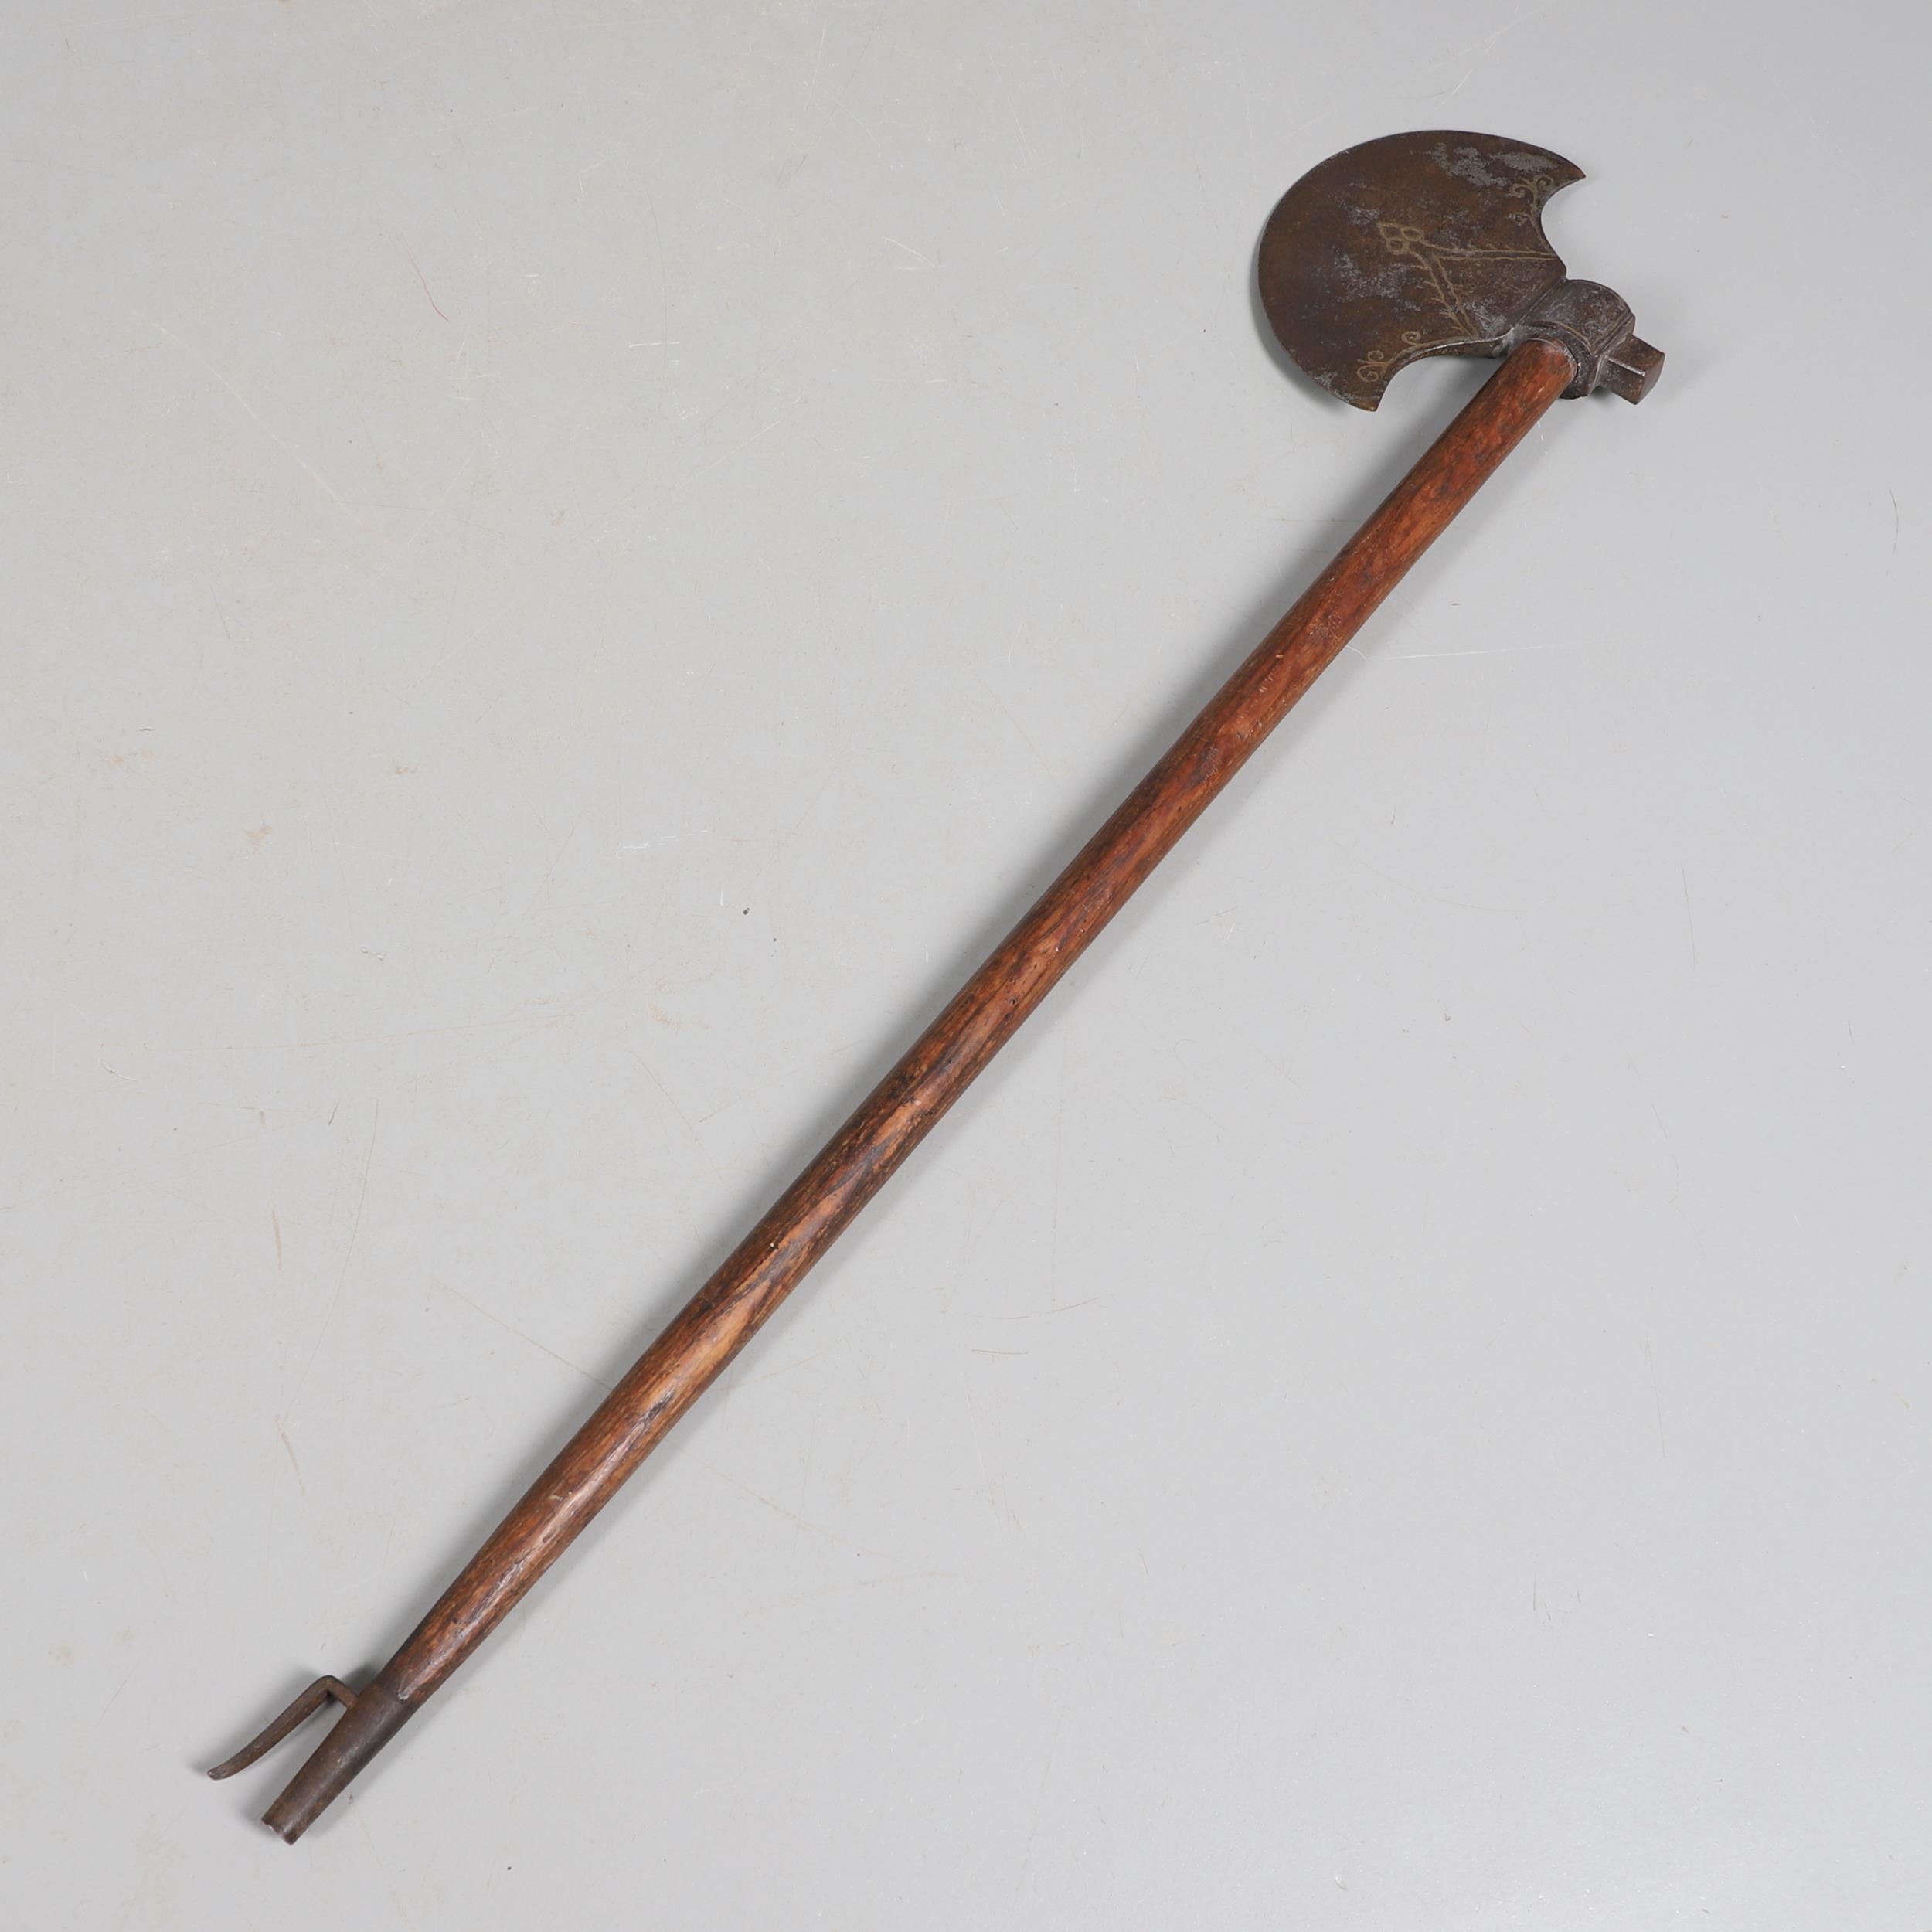 A SUBSTANTIAL PERSIAN OR OTTOMAN TWO HANDLED AXE. - Image 2 of 11